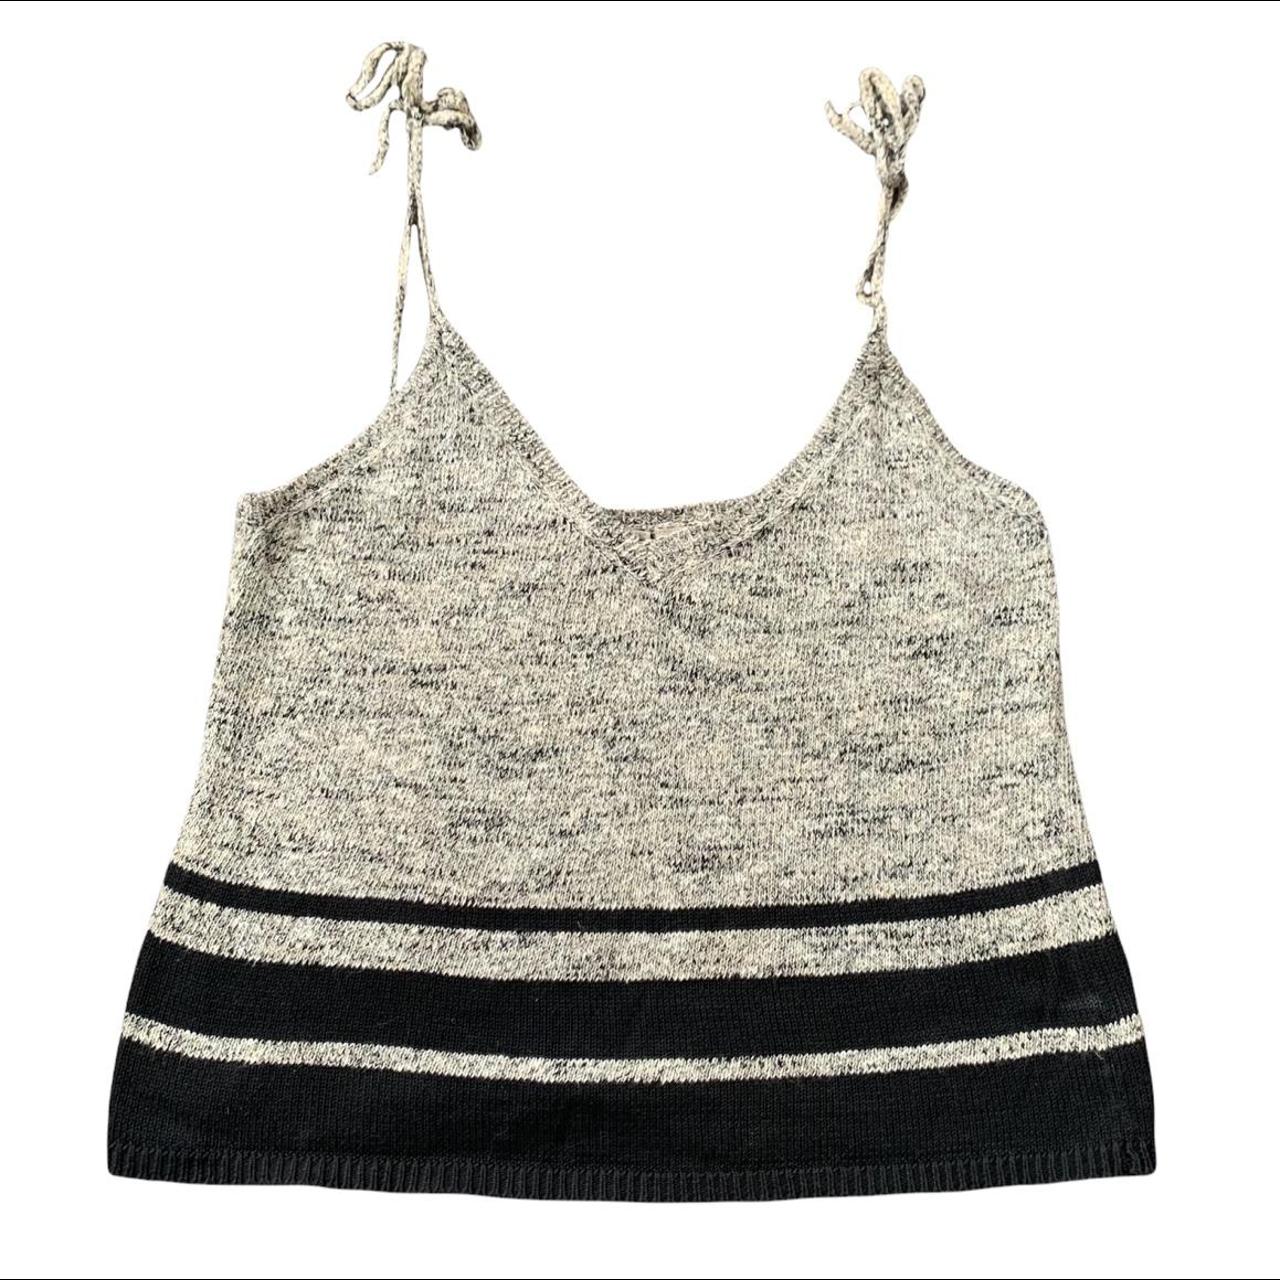 Product Image 1 - 🖤 Knit Crop Top 🖤

Size